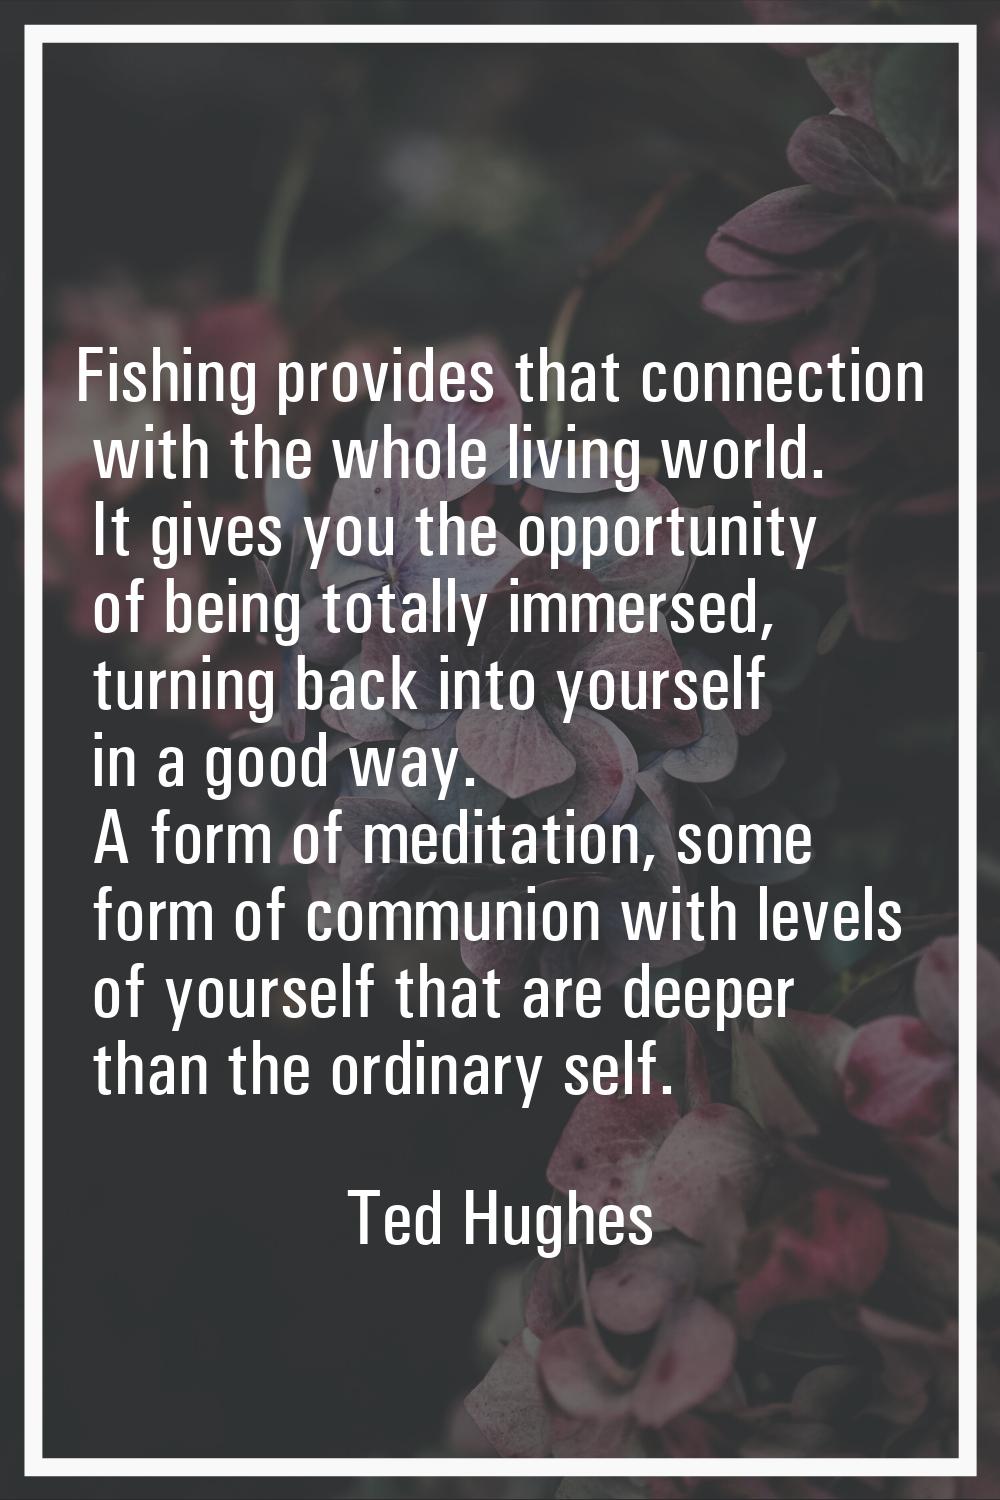 Fishing provides that connection with the whole living world. It gives you the opportunity of being